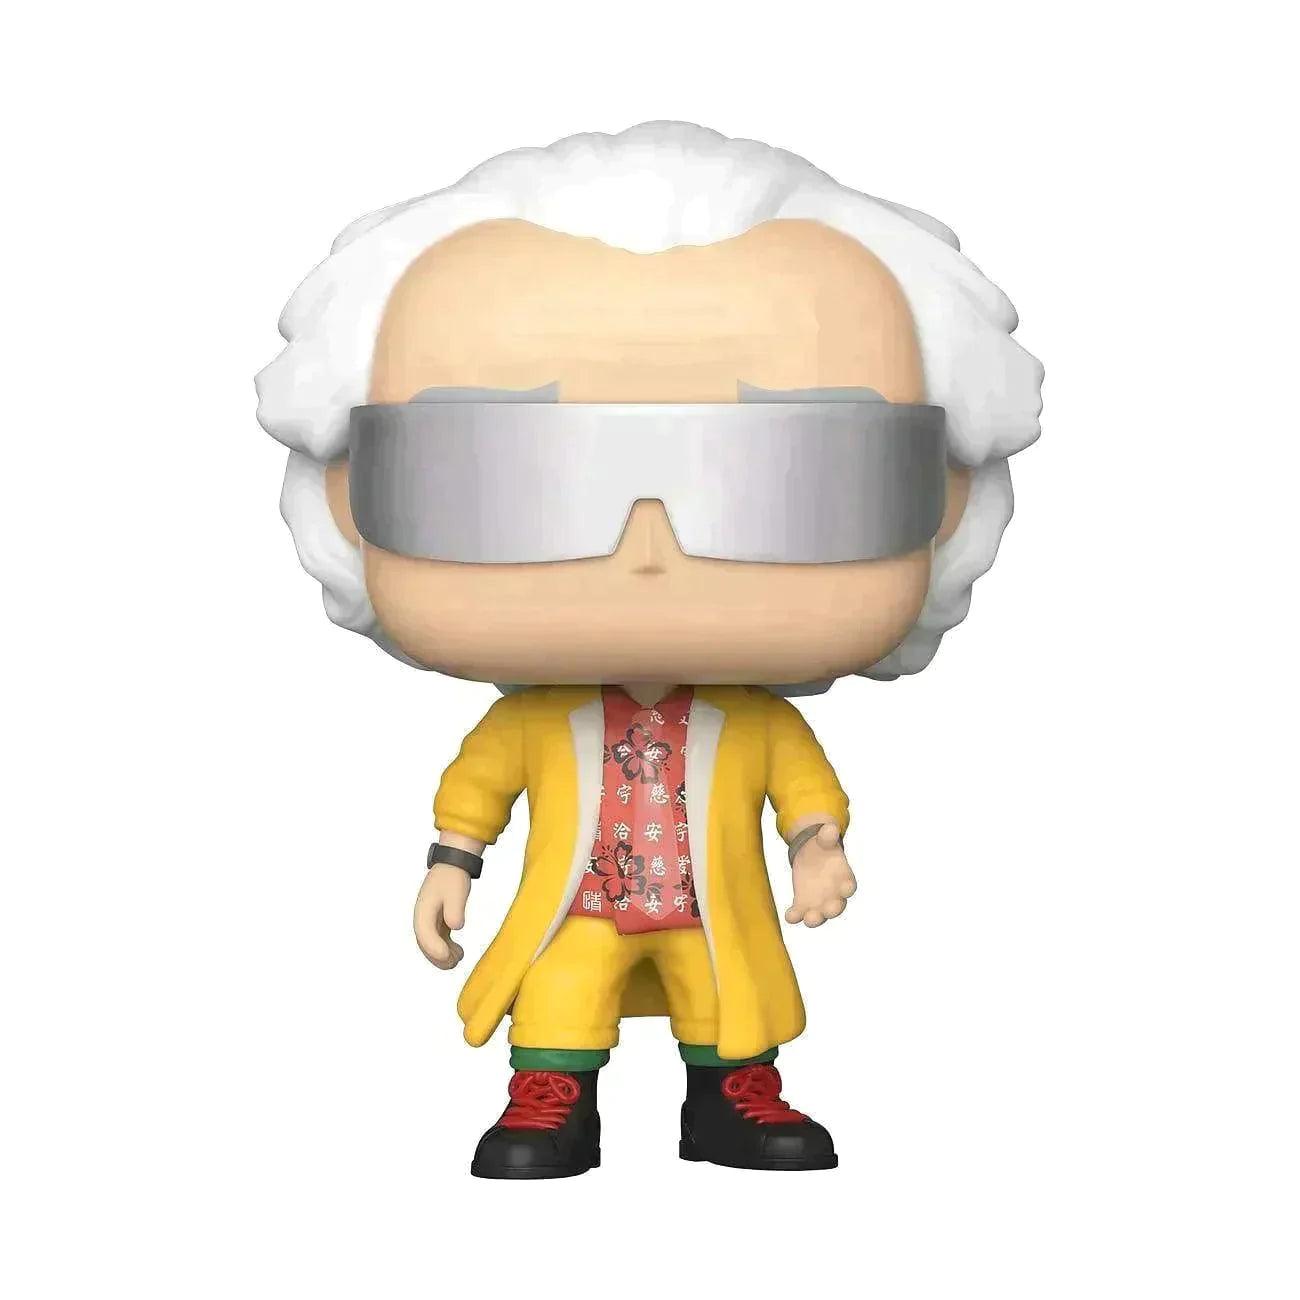 Funko Pop! 960 Back to the Future Doc Emmet Brown FUN 46915 | 2TTOYS ✓ Official shop<br>